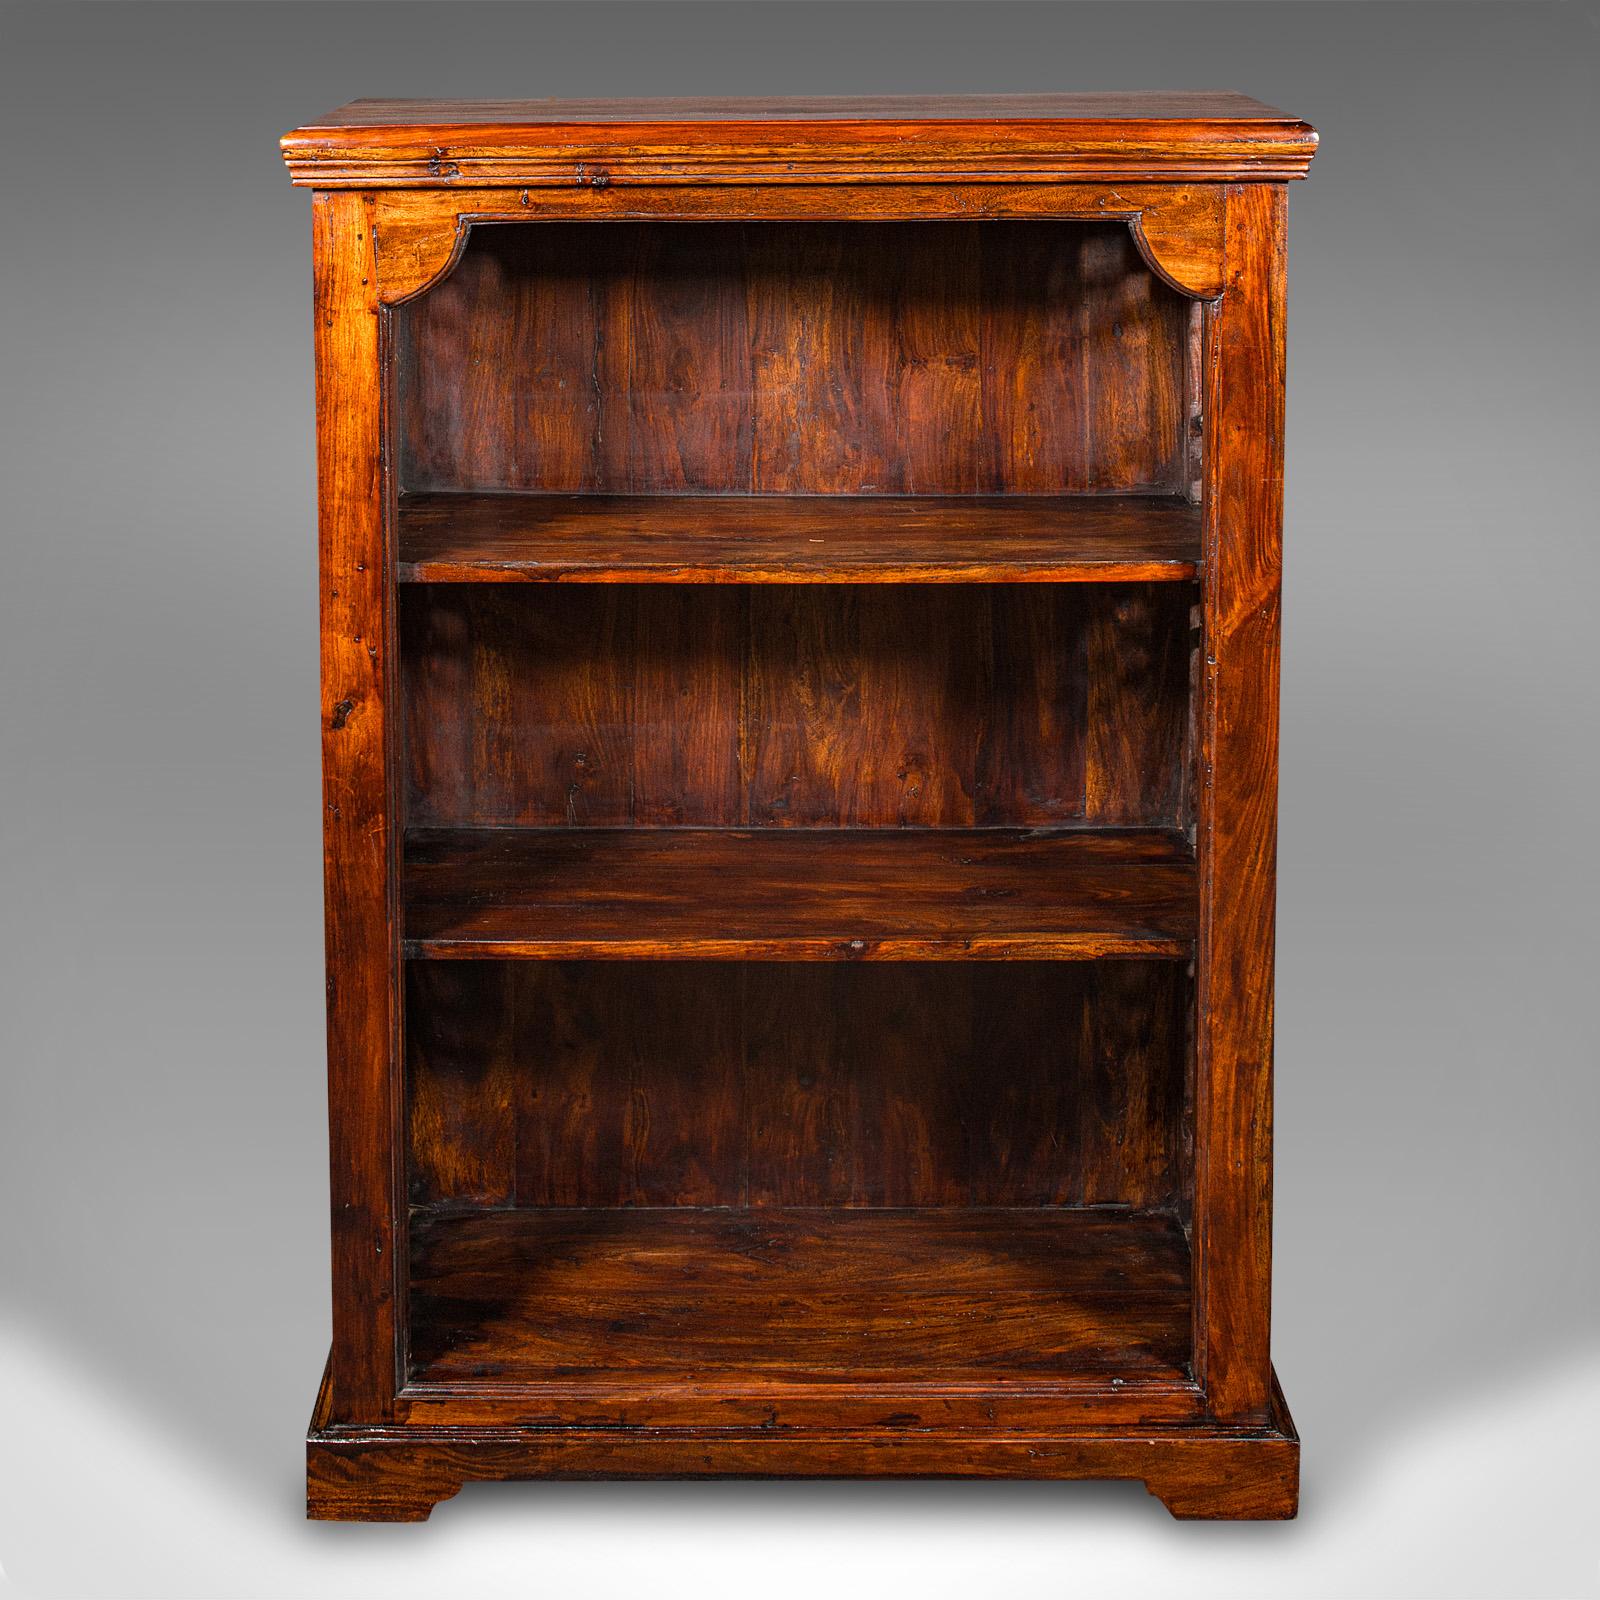 This is a vintage open bookcase. An Asian, stained Hevea and cast iron shelving unit in Regency and Colonial revival taste, dating to the late 20th century, circa 1980.

Imposing and substantial, with generous shelf space
Displaying a desirable aged